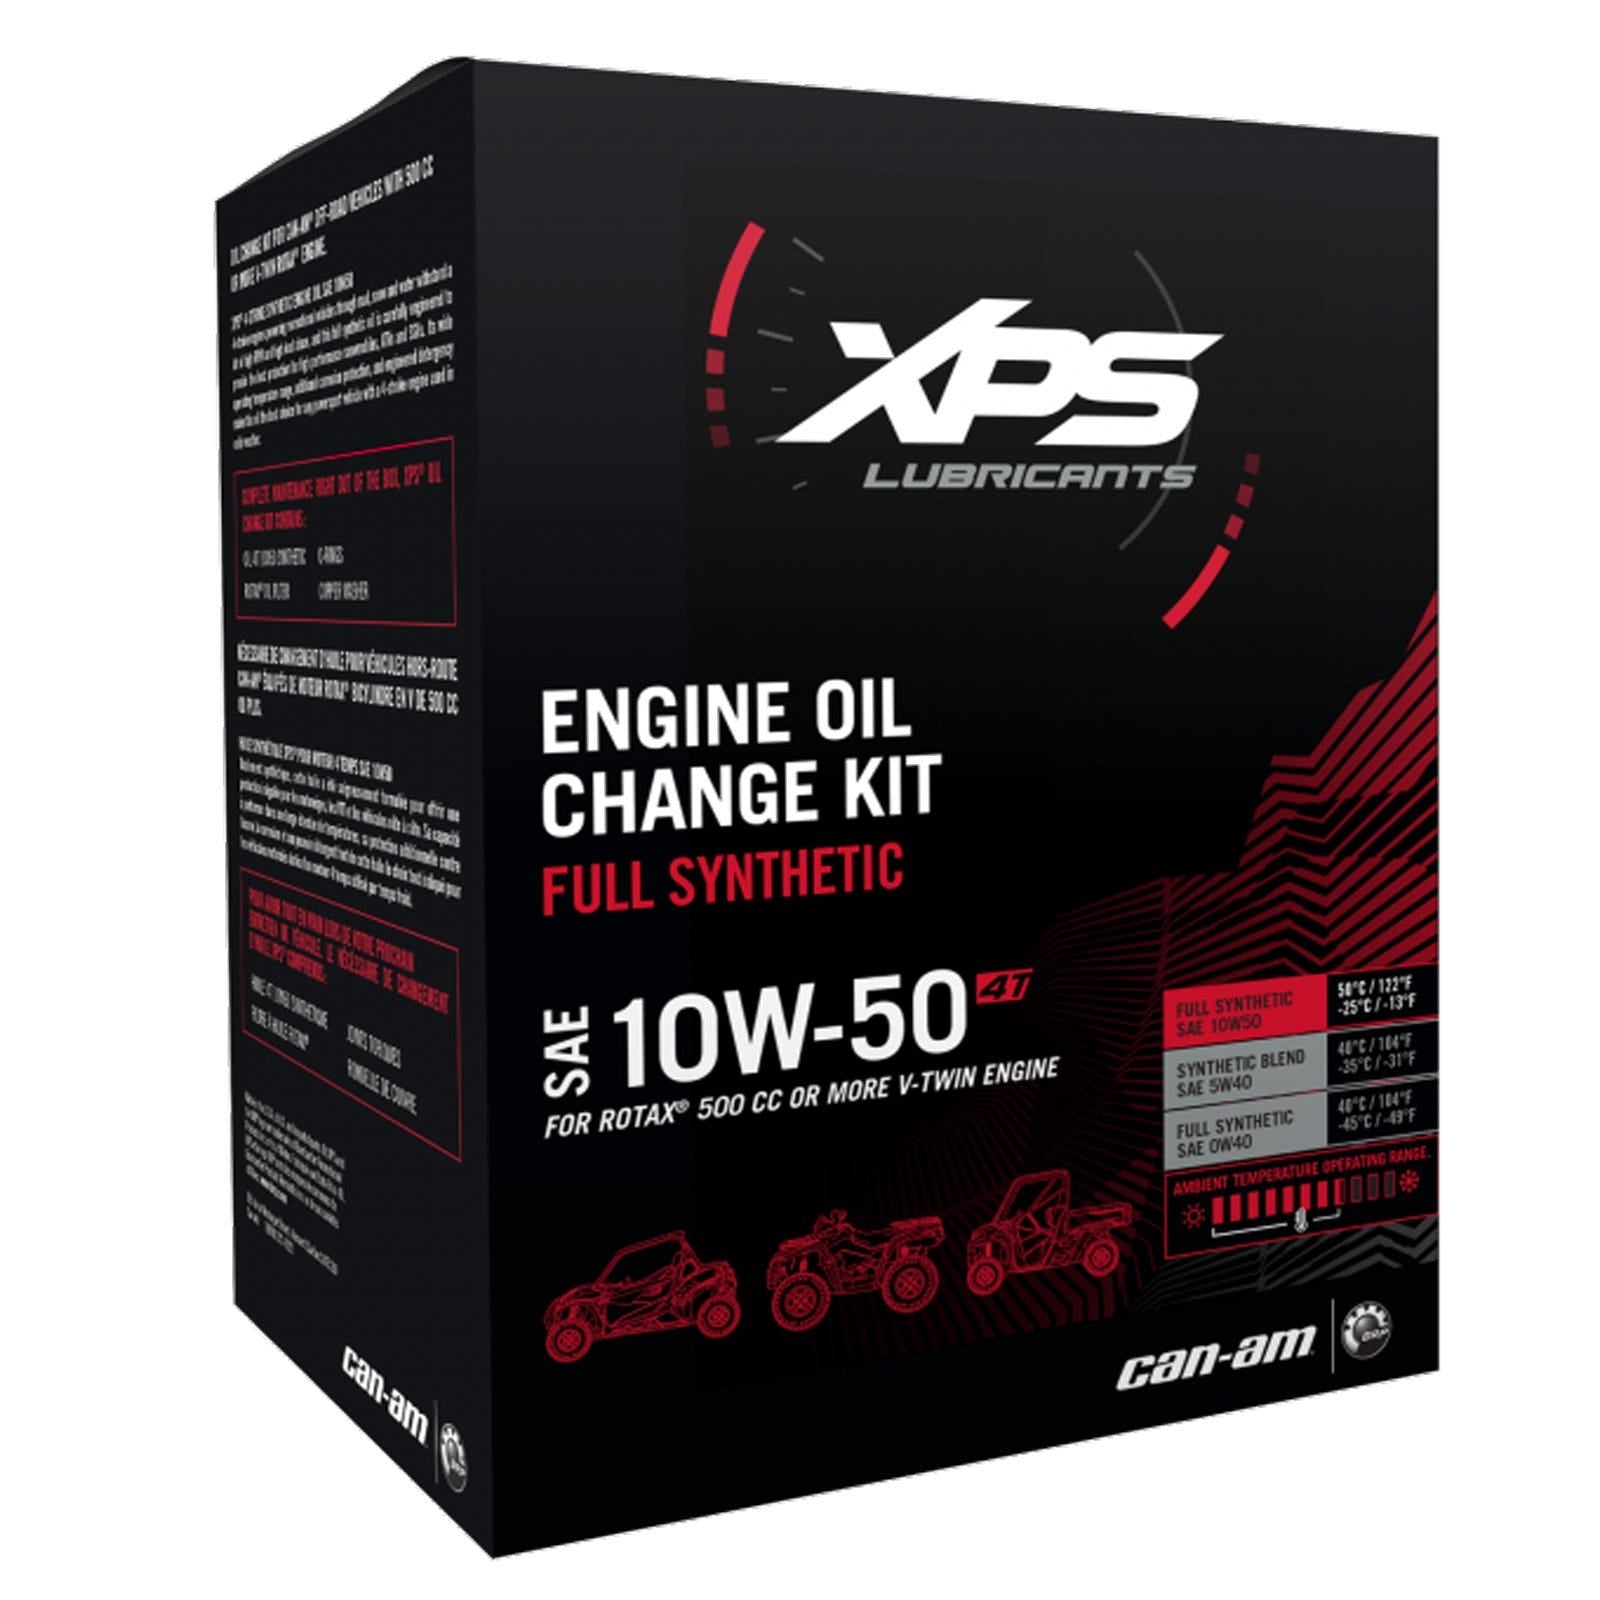 Can-am 4T 10W-50 Synthetic Oil Change Kit for Rotax 500 cc or more V-Twin engine 779252 - The Parts Lodge